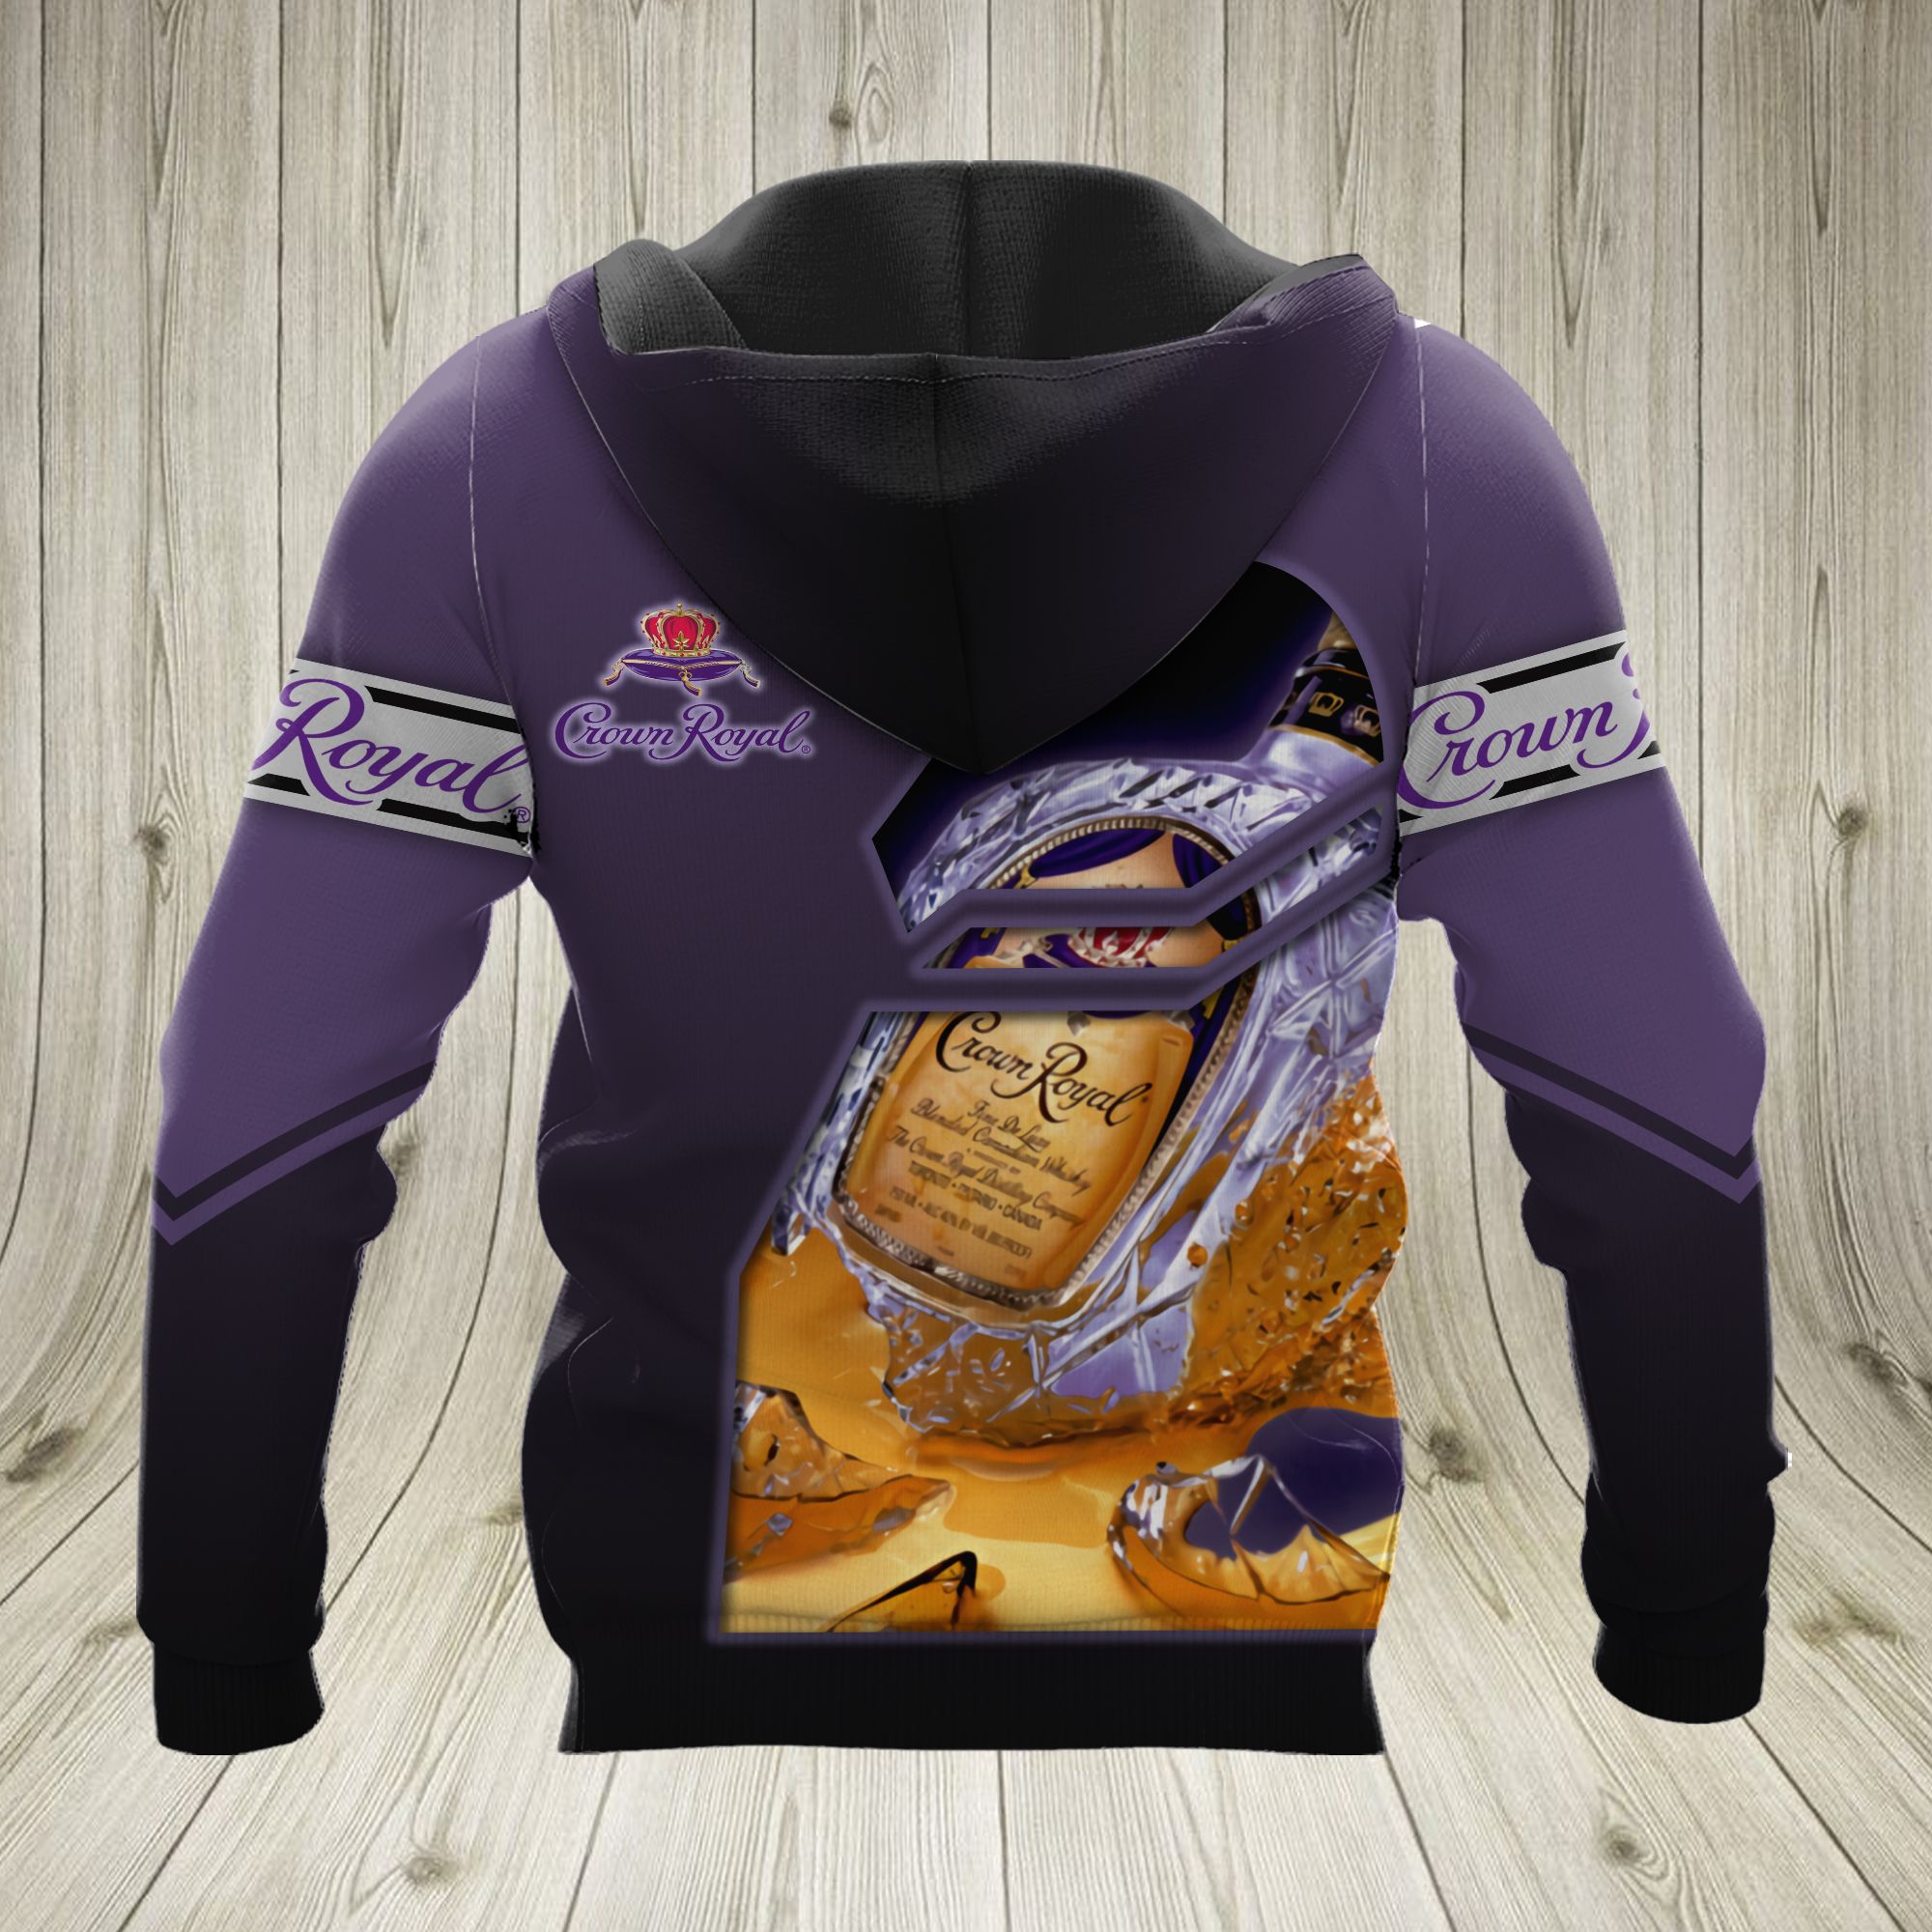 Dory Crown Royal Peach I'm never drinking again 3d hoodie 5